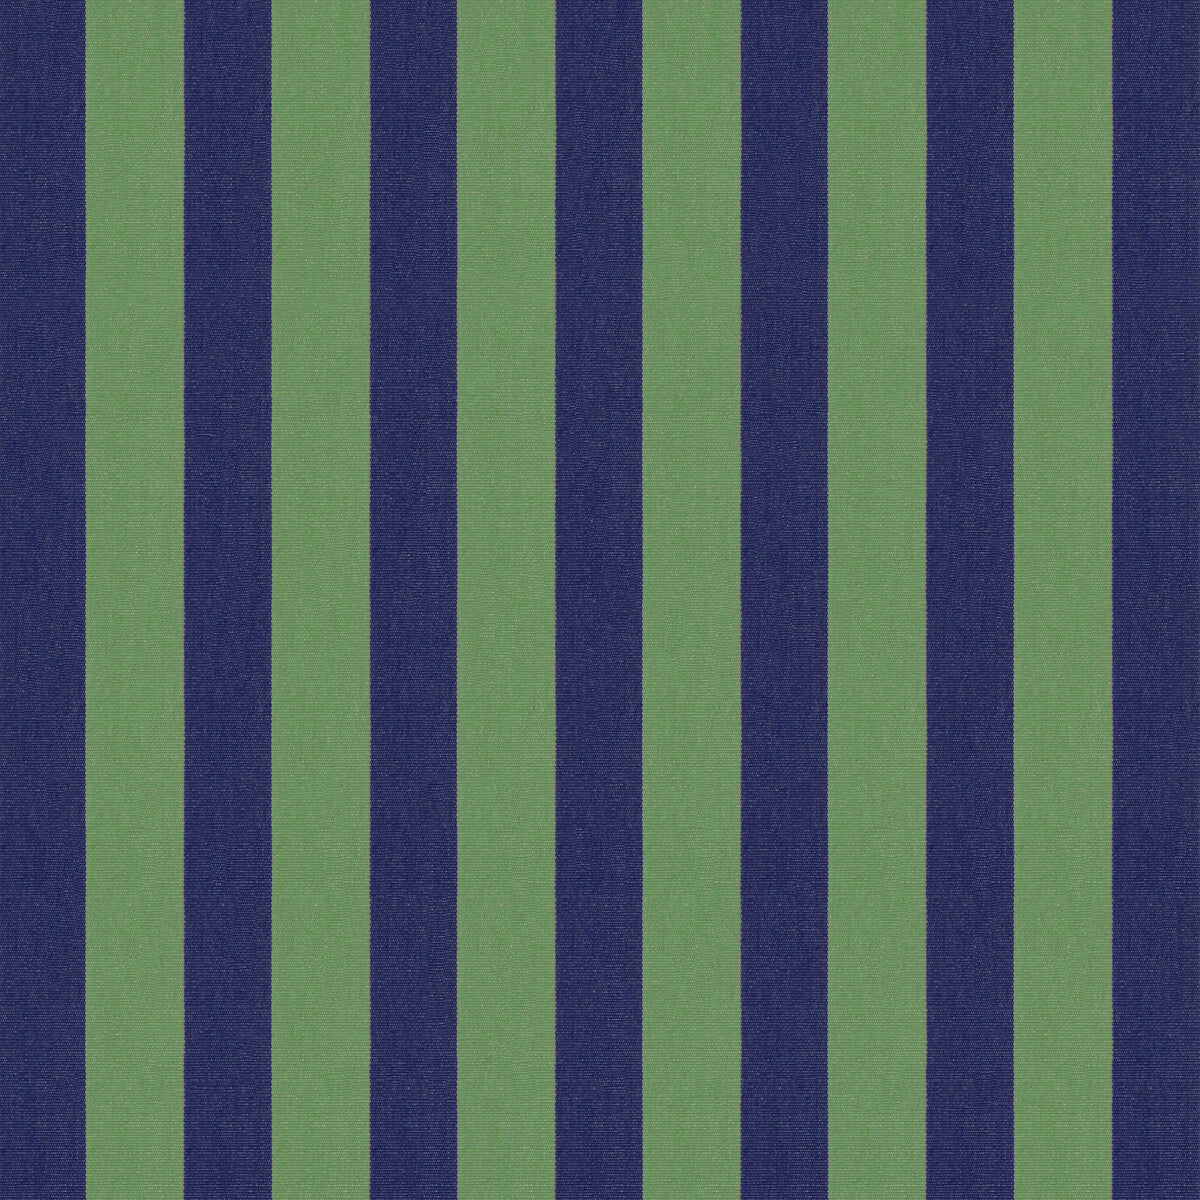 Almudaina fabric in verde claro/azul color - pattern GDT5671.008.0 - by Gaston y Daniela in the Gaston Maiorica collection